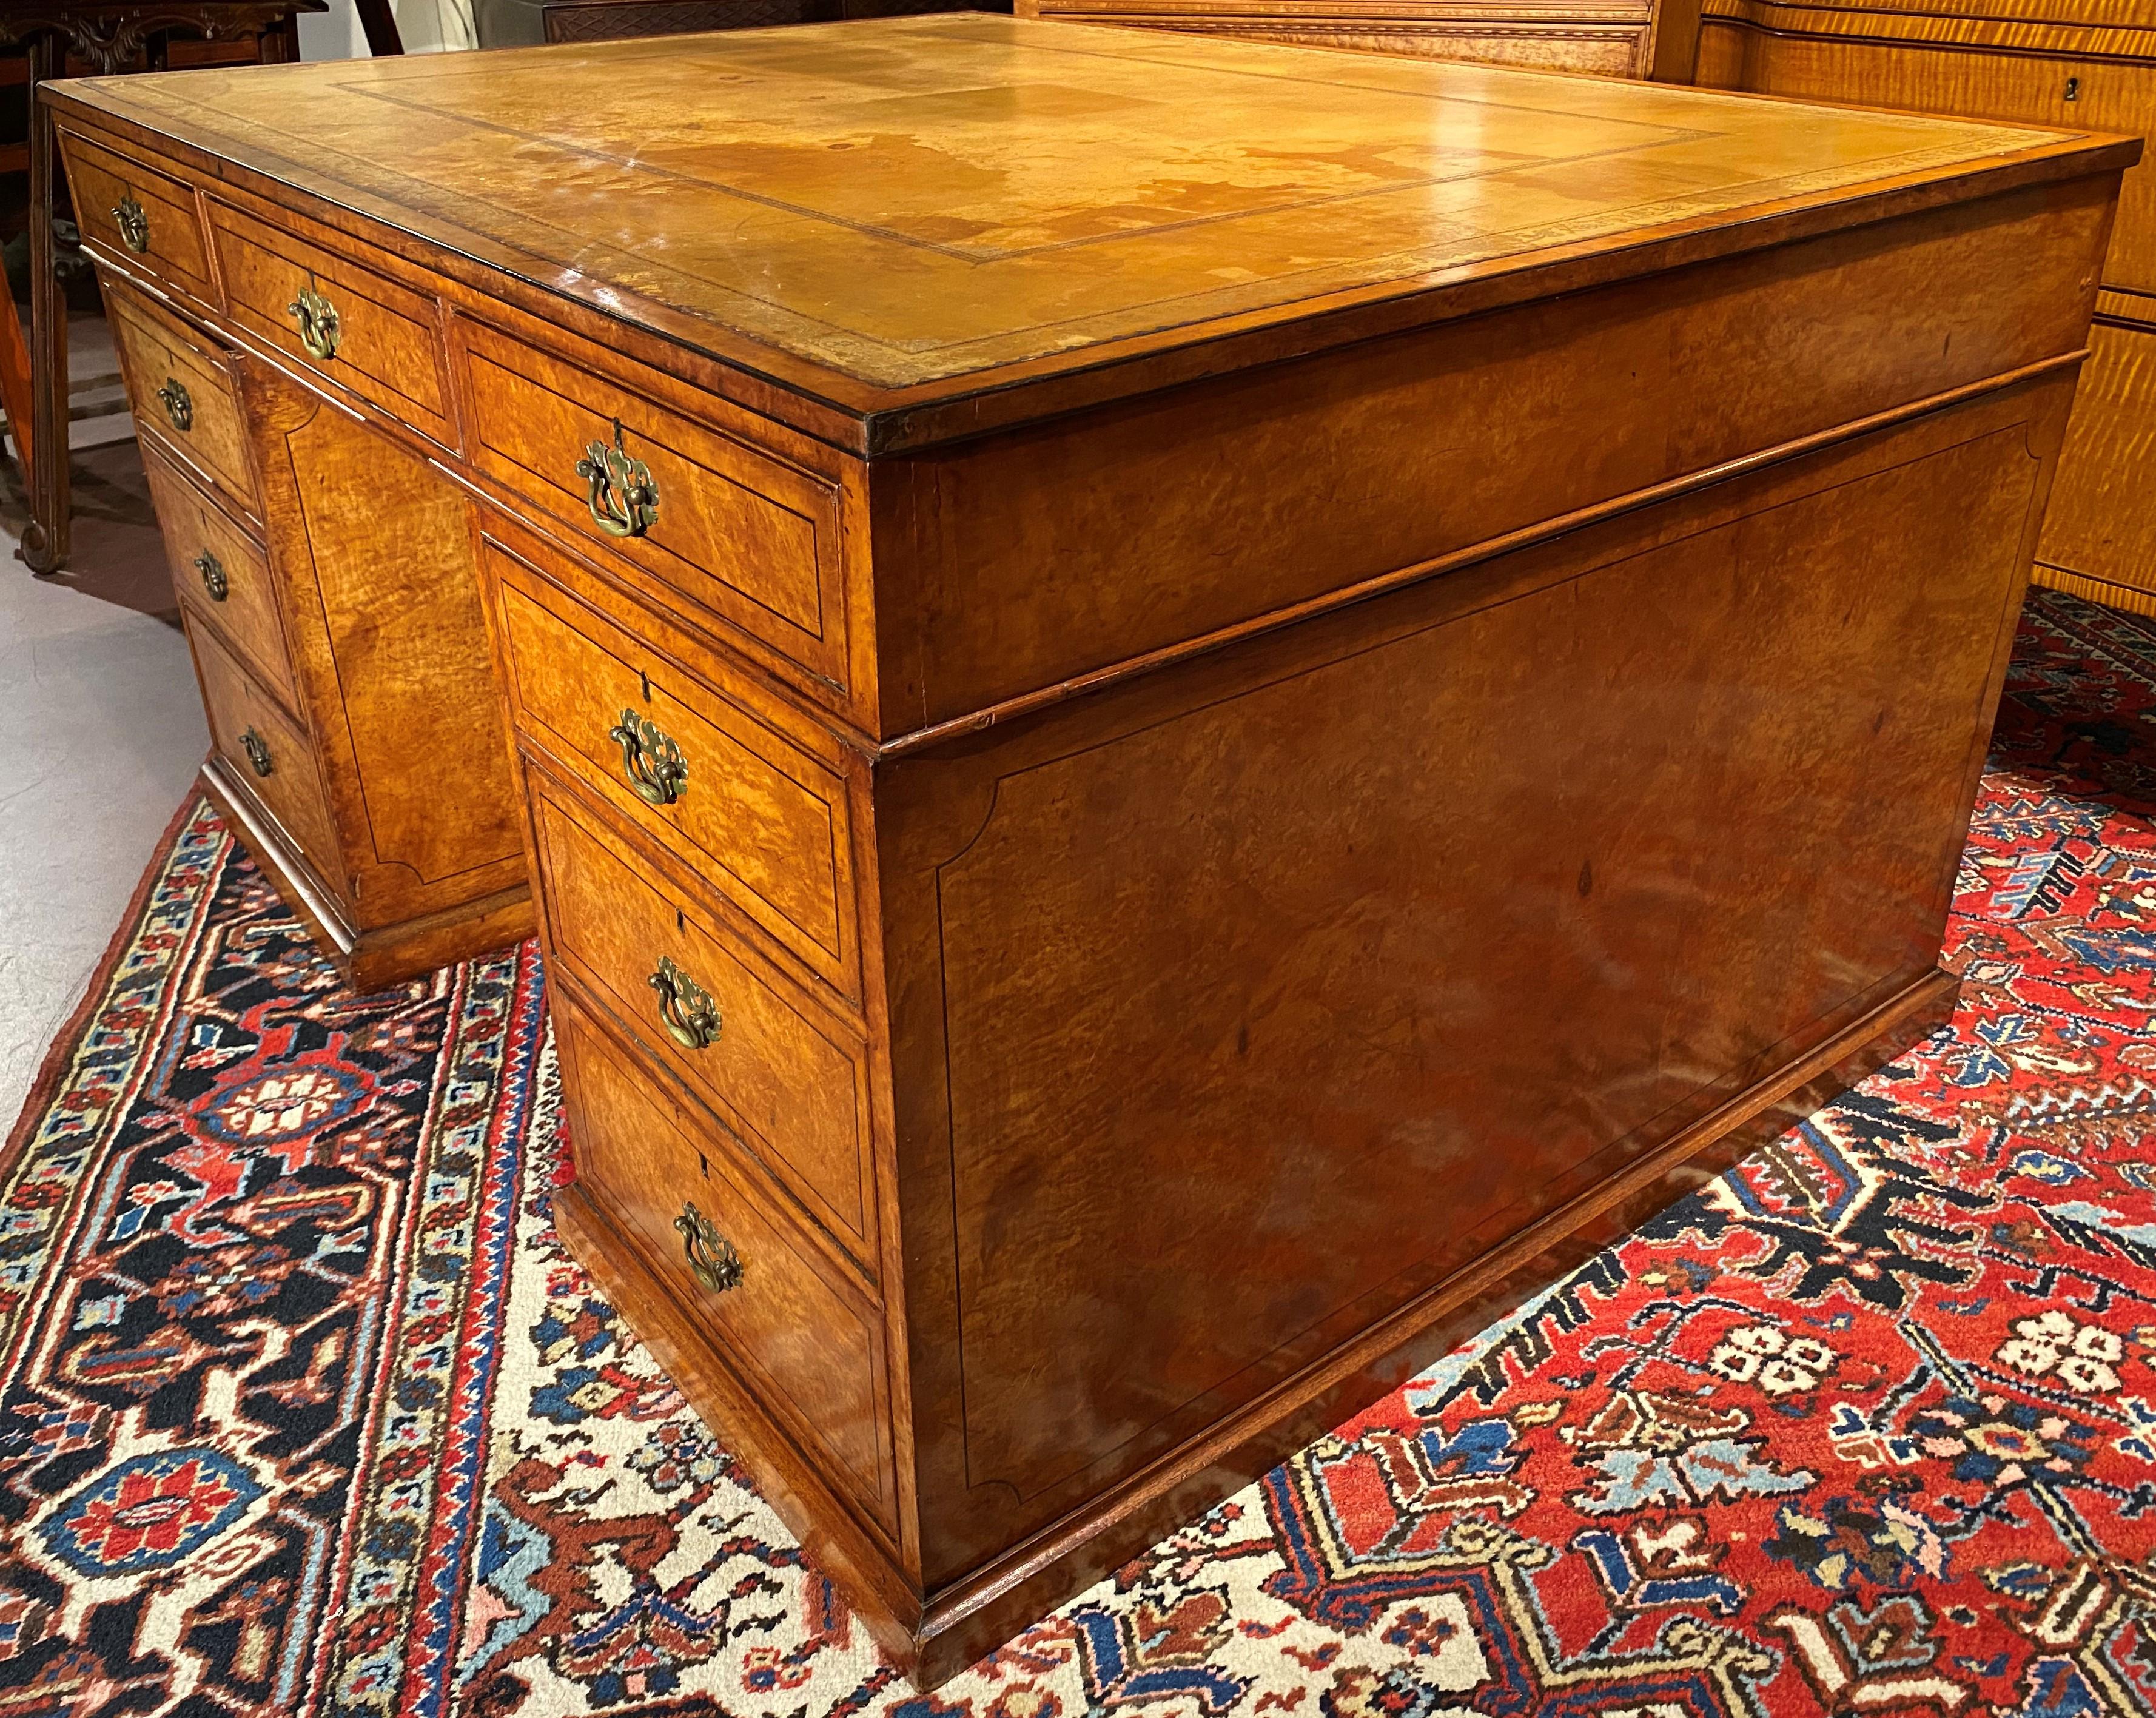 Cast 19th Century English Birdseye Maple Partners Desk with Tooled Leather Top